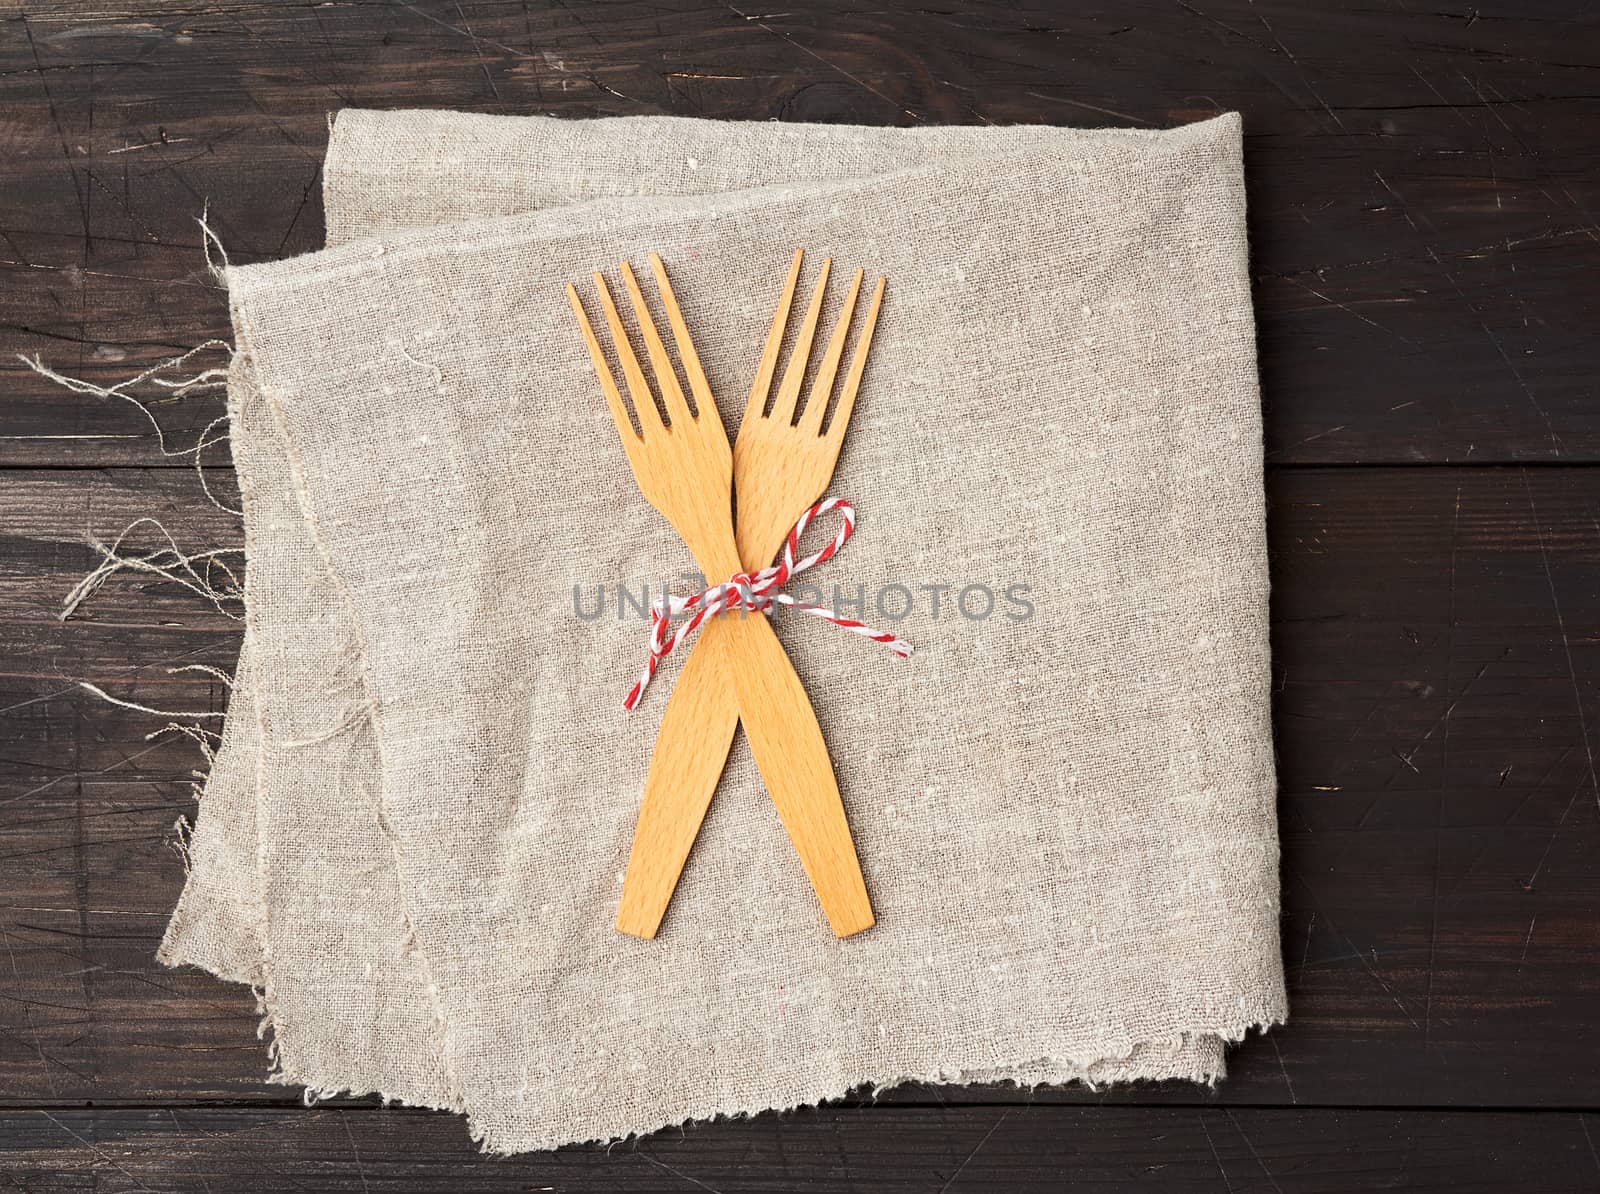 two wooden forks are tied with a rope and lie on a brown wooden  by ndanko